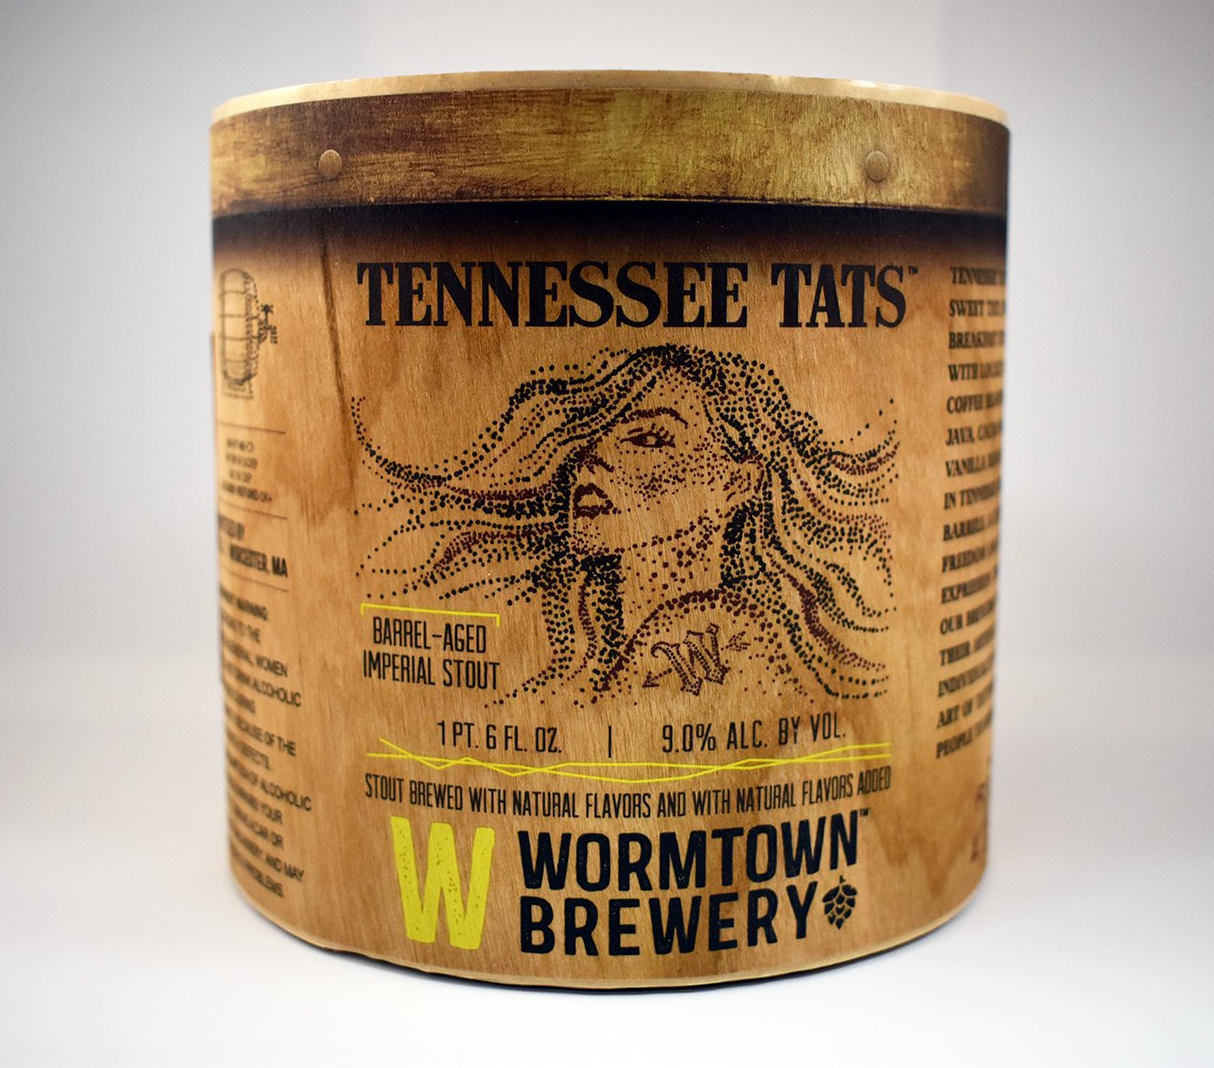 Wormtown Brewery's Tennessee Tats Labels